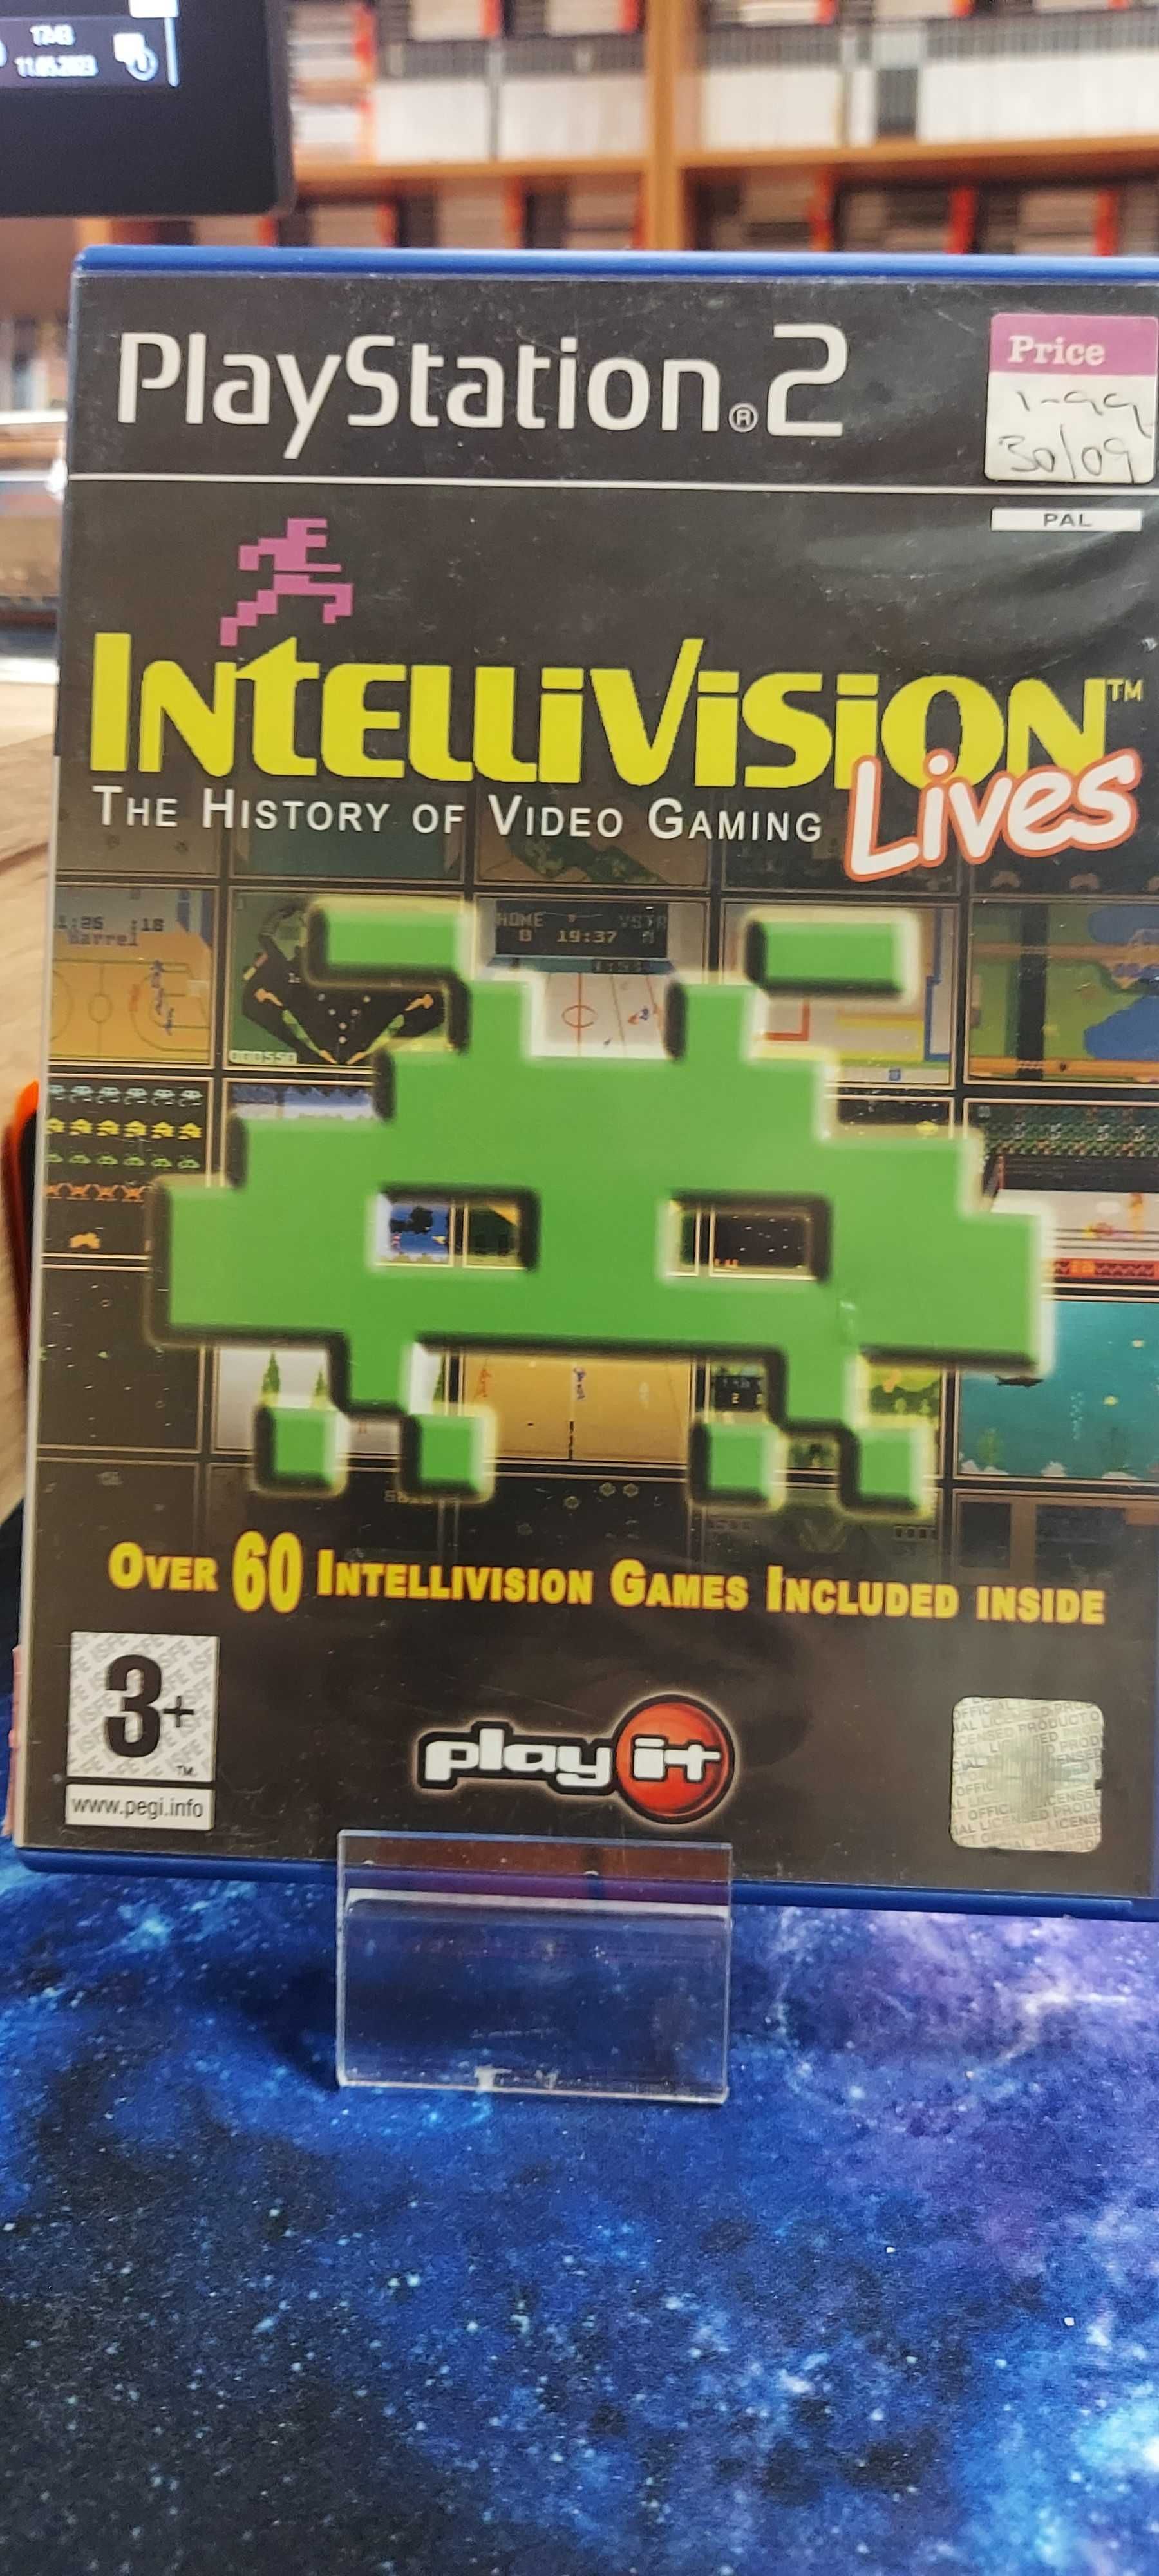 Intelliviosion lives: The history of video games PS2